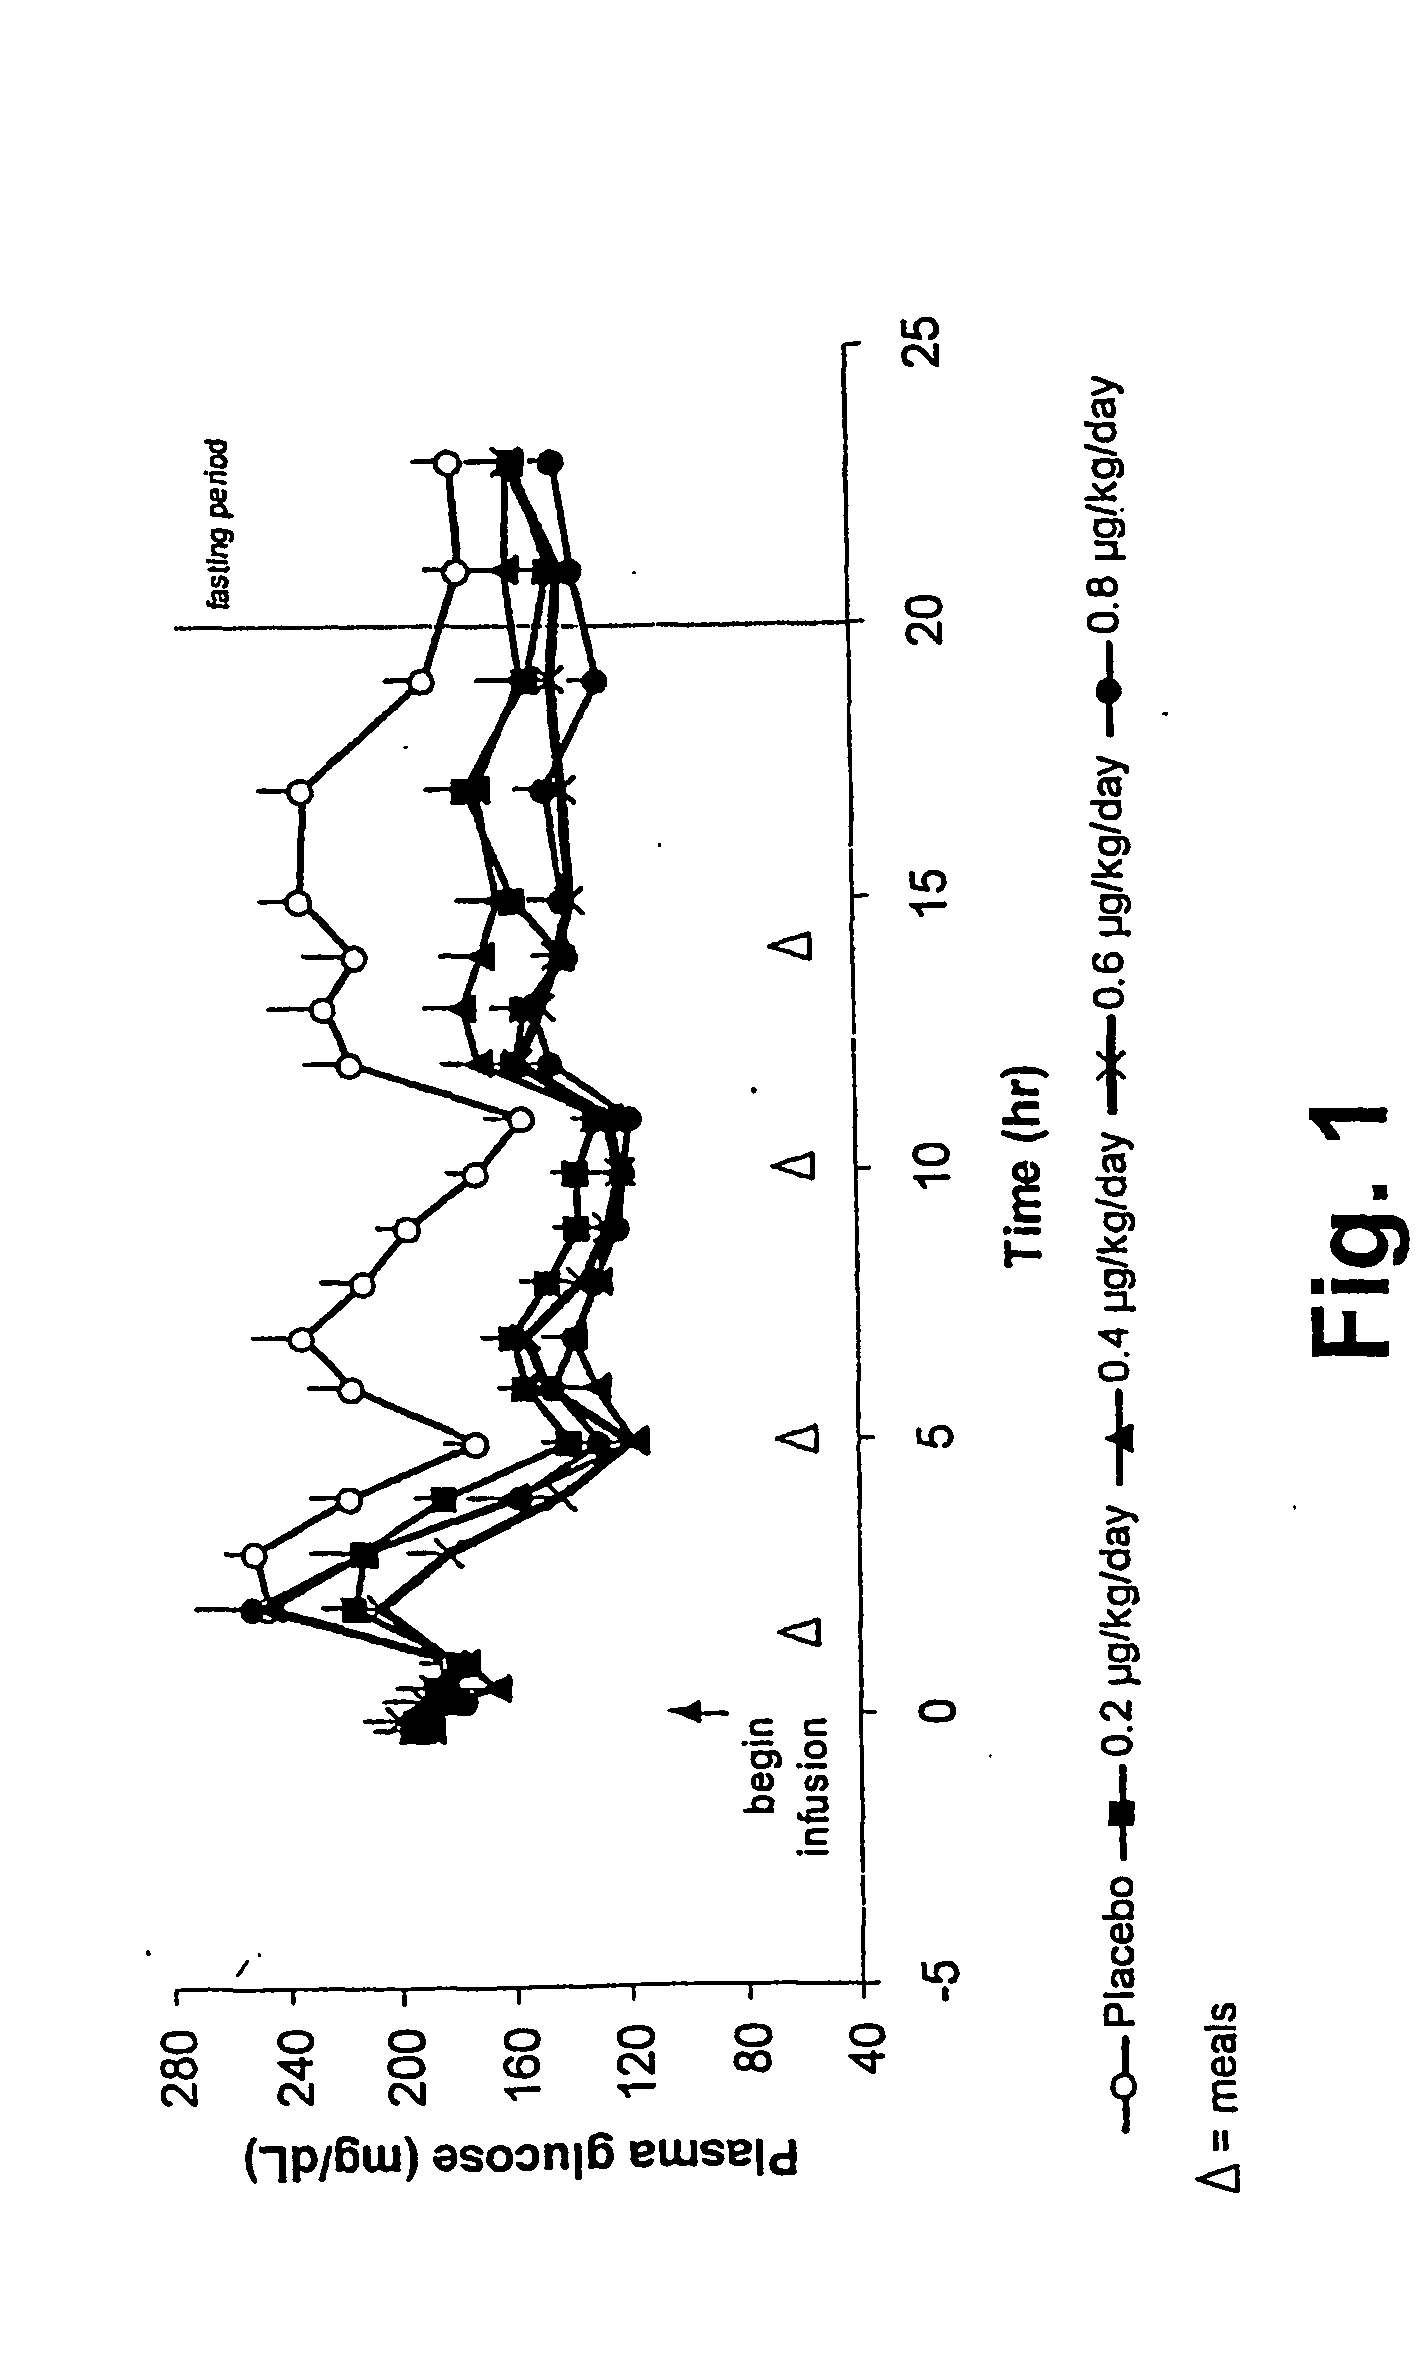 Novel exendin agonist formulations and methods of administration thereof